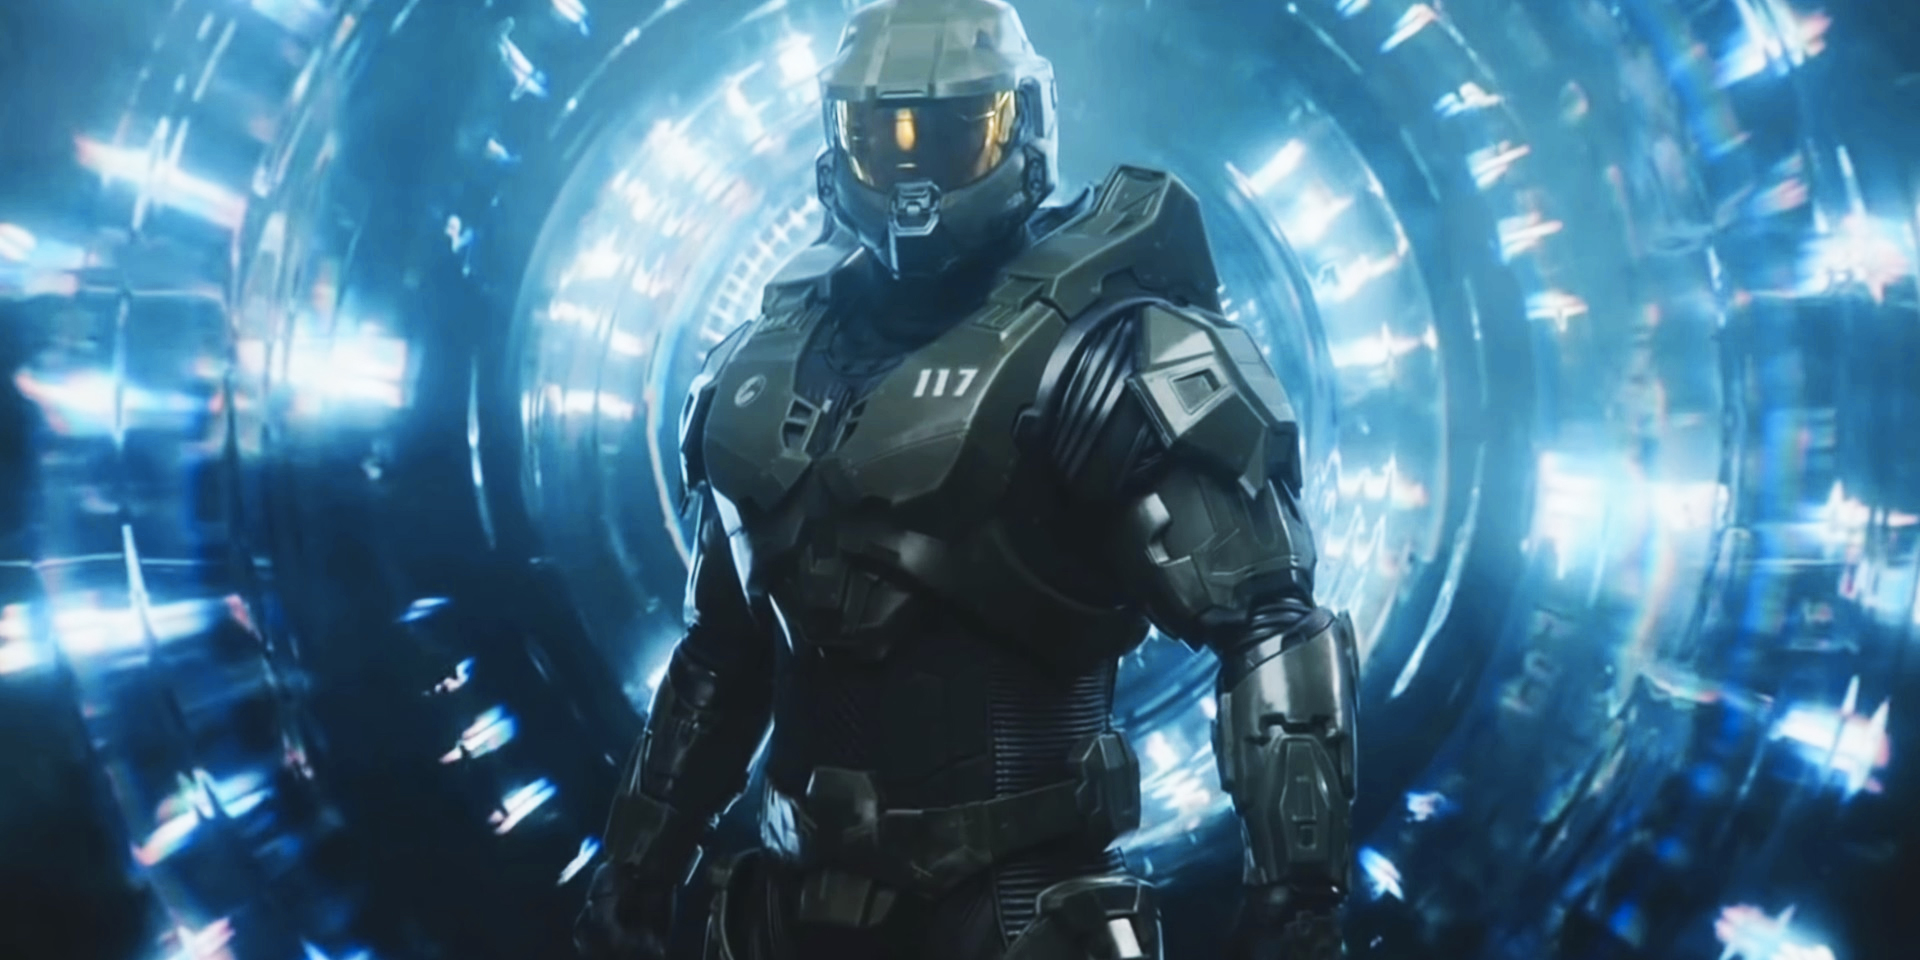 Paramount Plus Halo review: Master Chief's risky unmasking doesn't work -  The Verge